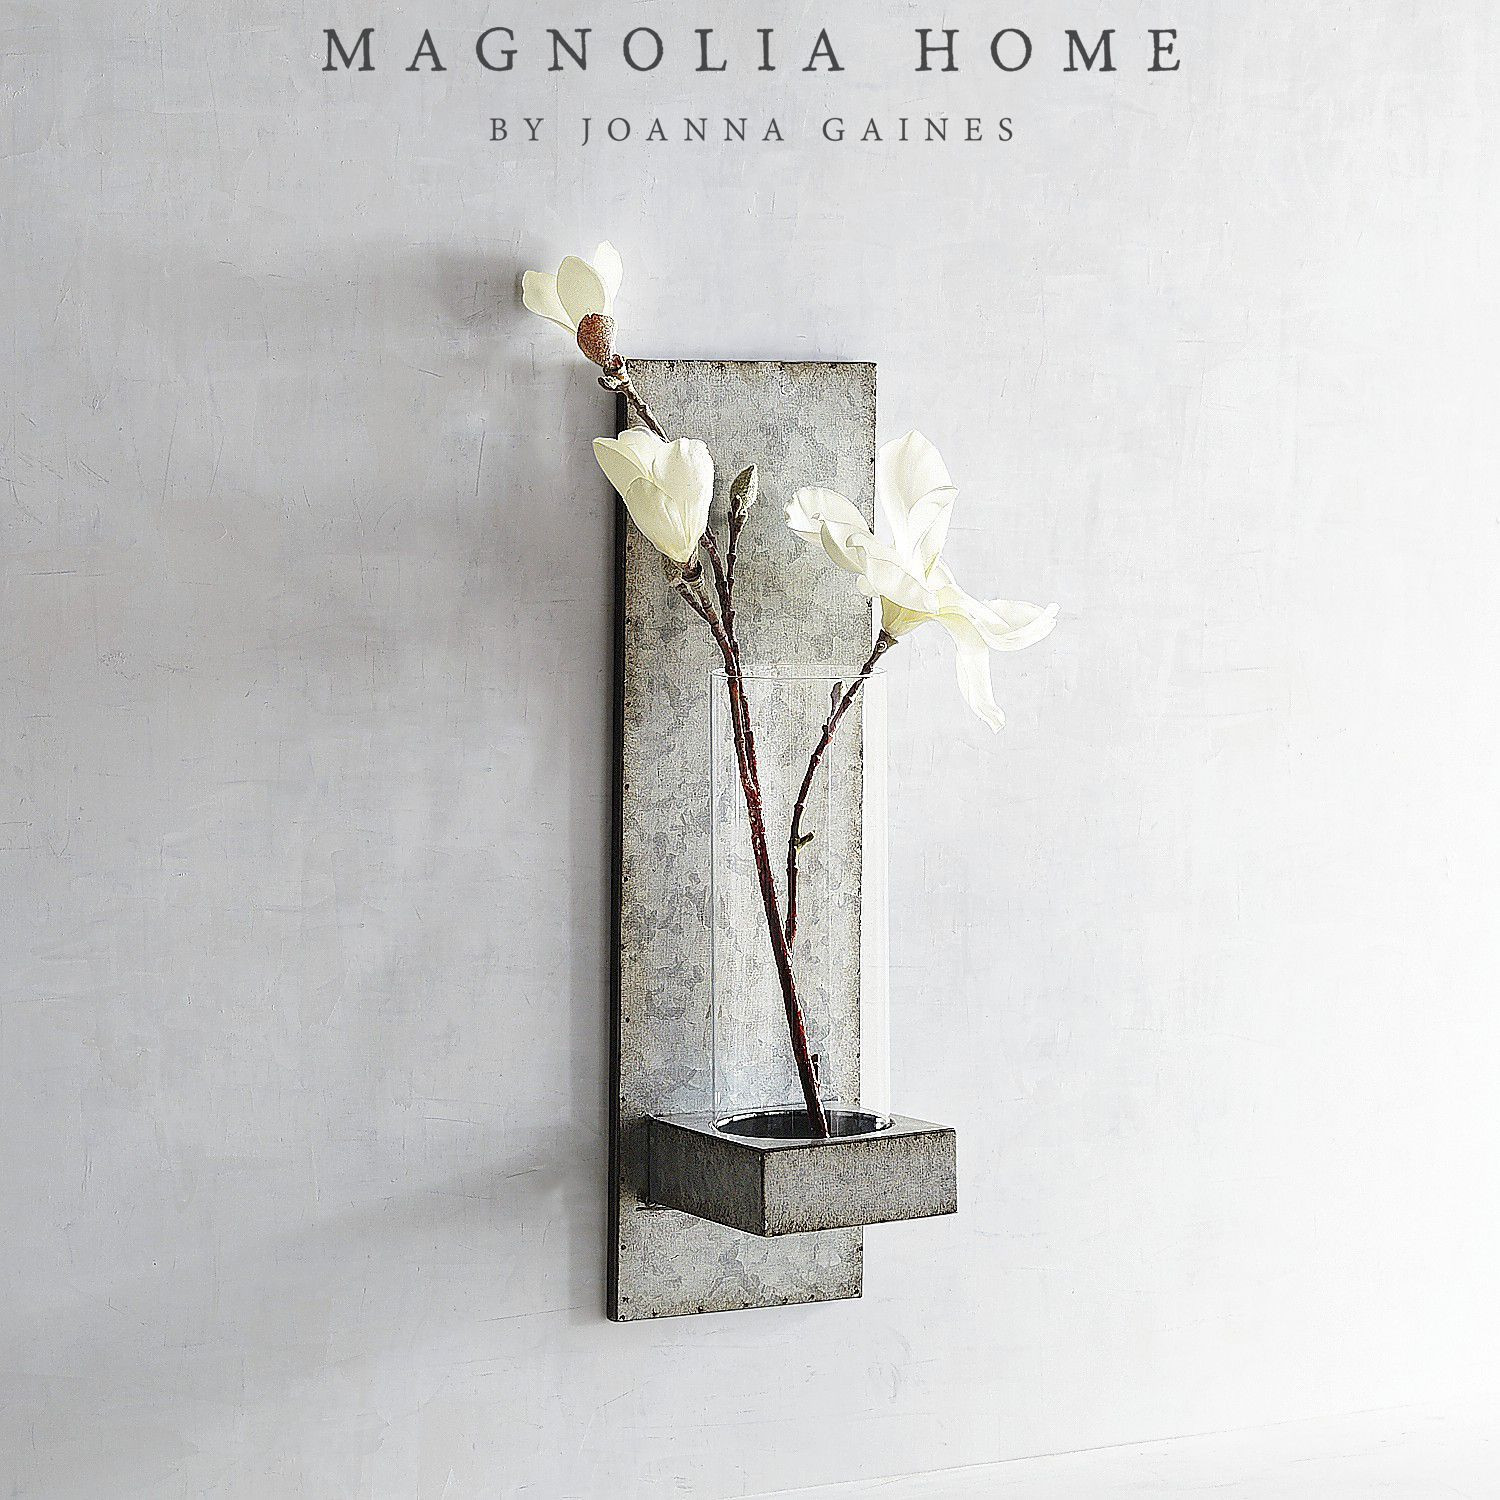 20 Trendy Galvanized Sheet Metal Vase 2024 free download galvanized sheet metal vase of magnolia home galvanized hanging vase sconce magnolia and products for this galvanized sconce from the magnolia home collection joanna gaines is crafted by han